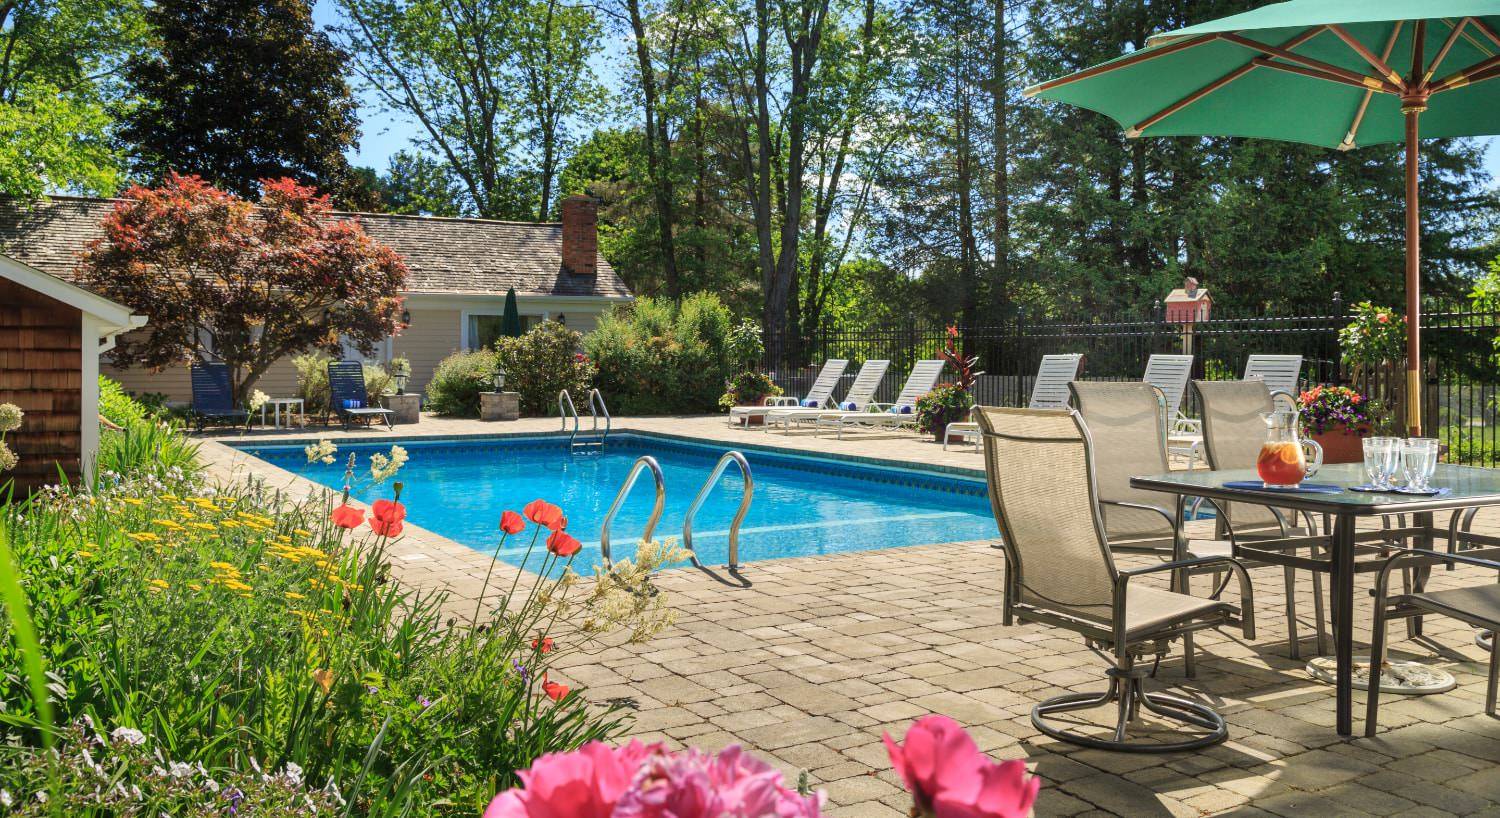 Pool area surrounded by brick patio with patio table and chairs, green umbrella, black wrought-iron fencing, large treen trees, and a lot of bushes and shrubs